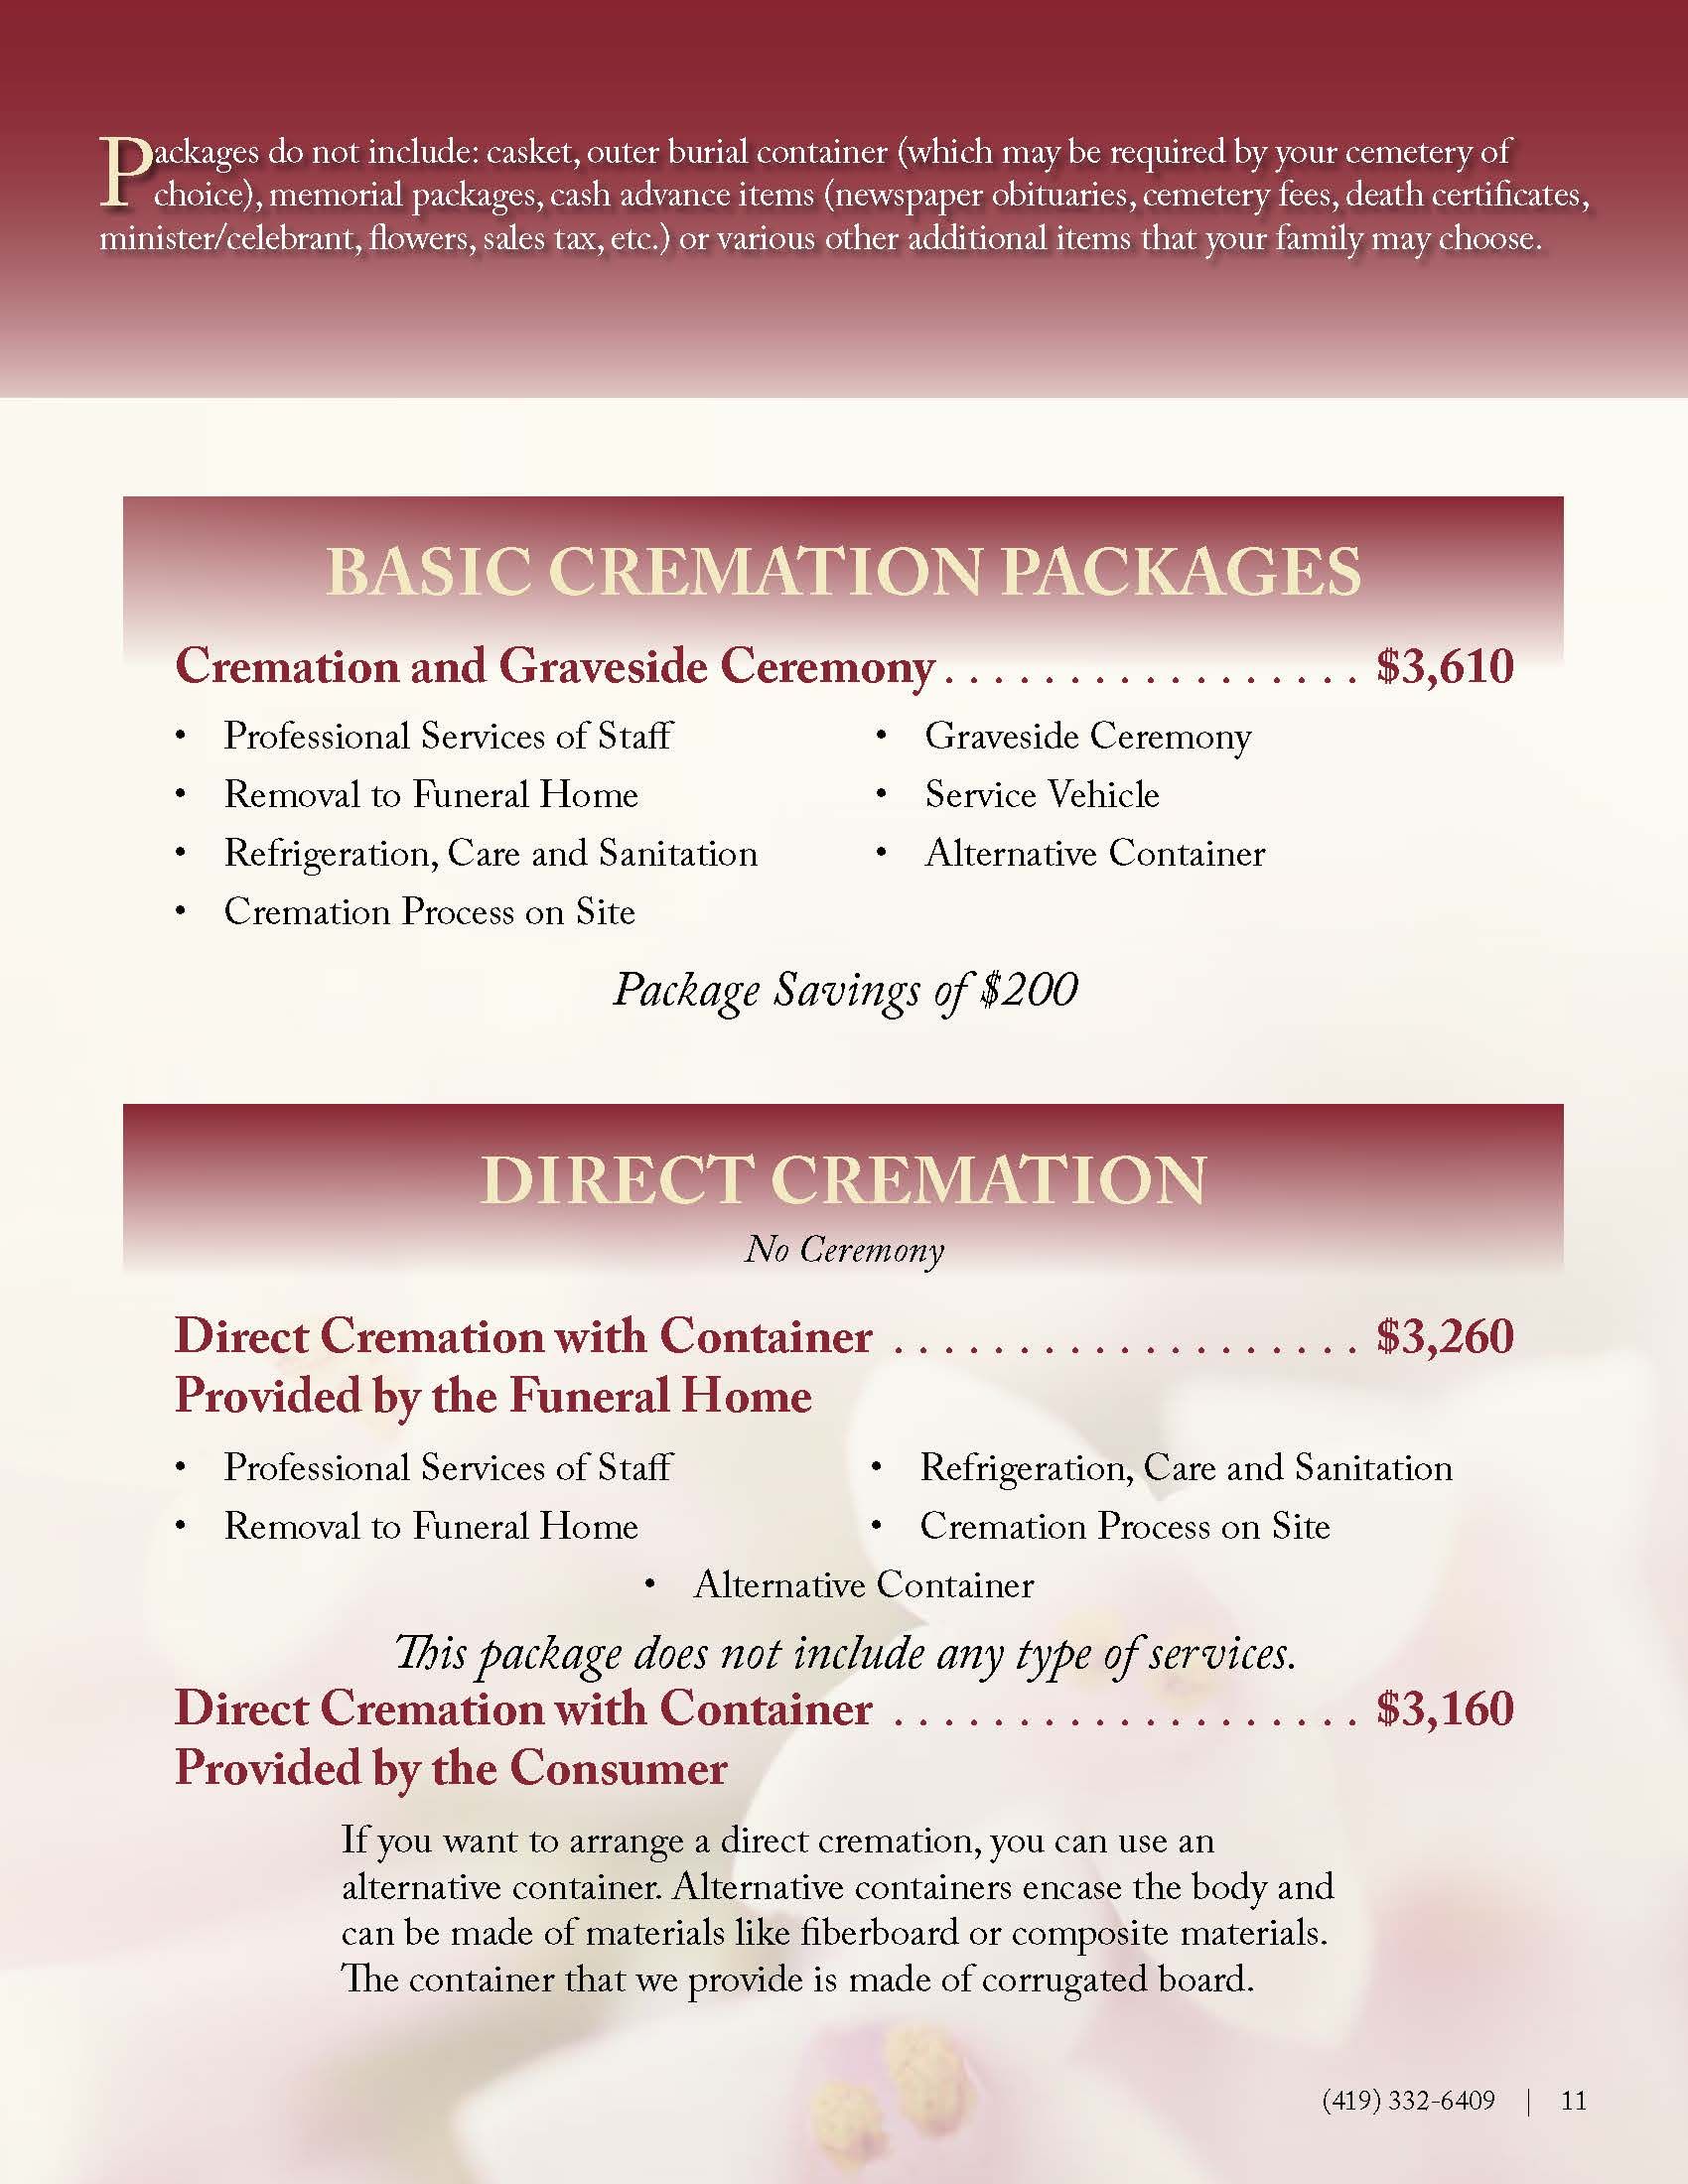 Cremation Prior to Services Packages Page 2